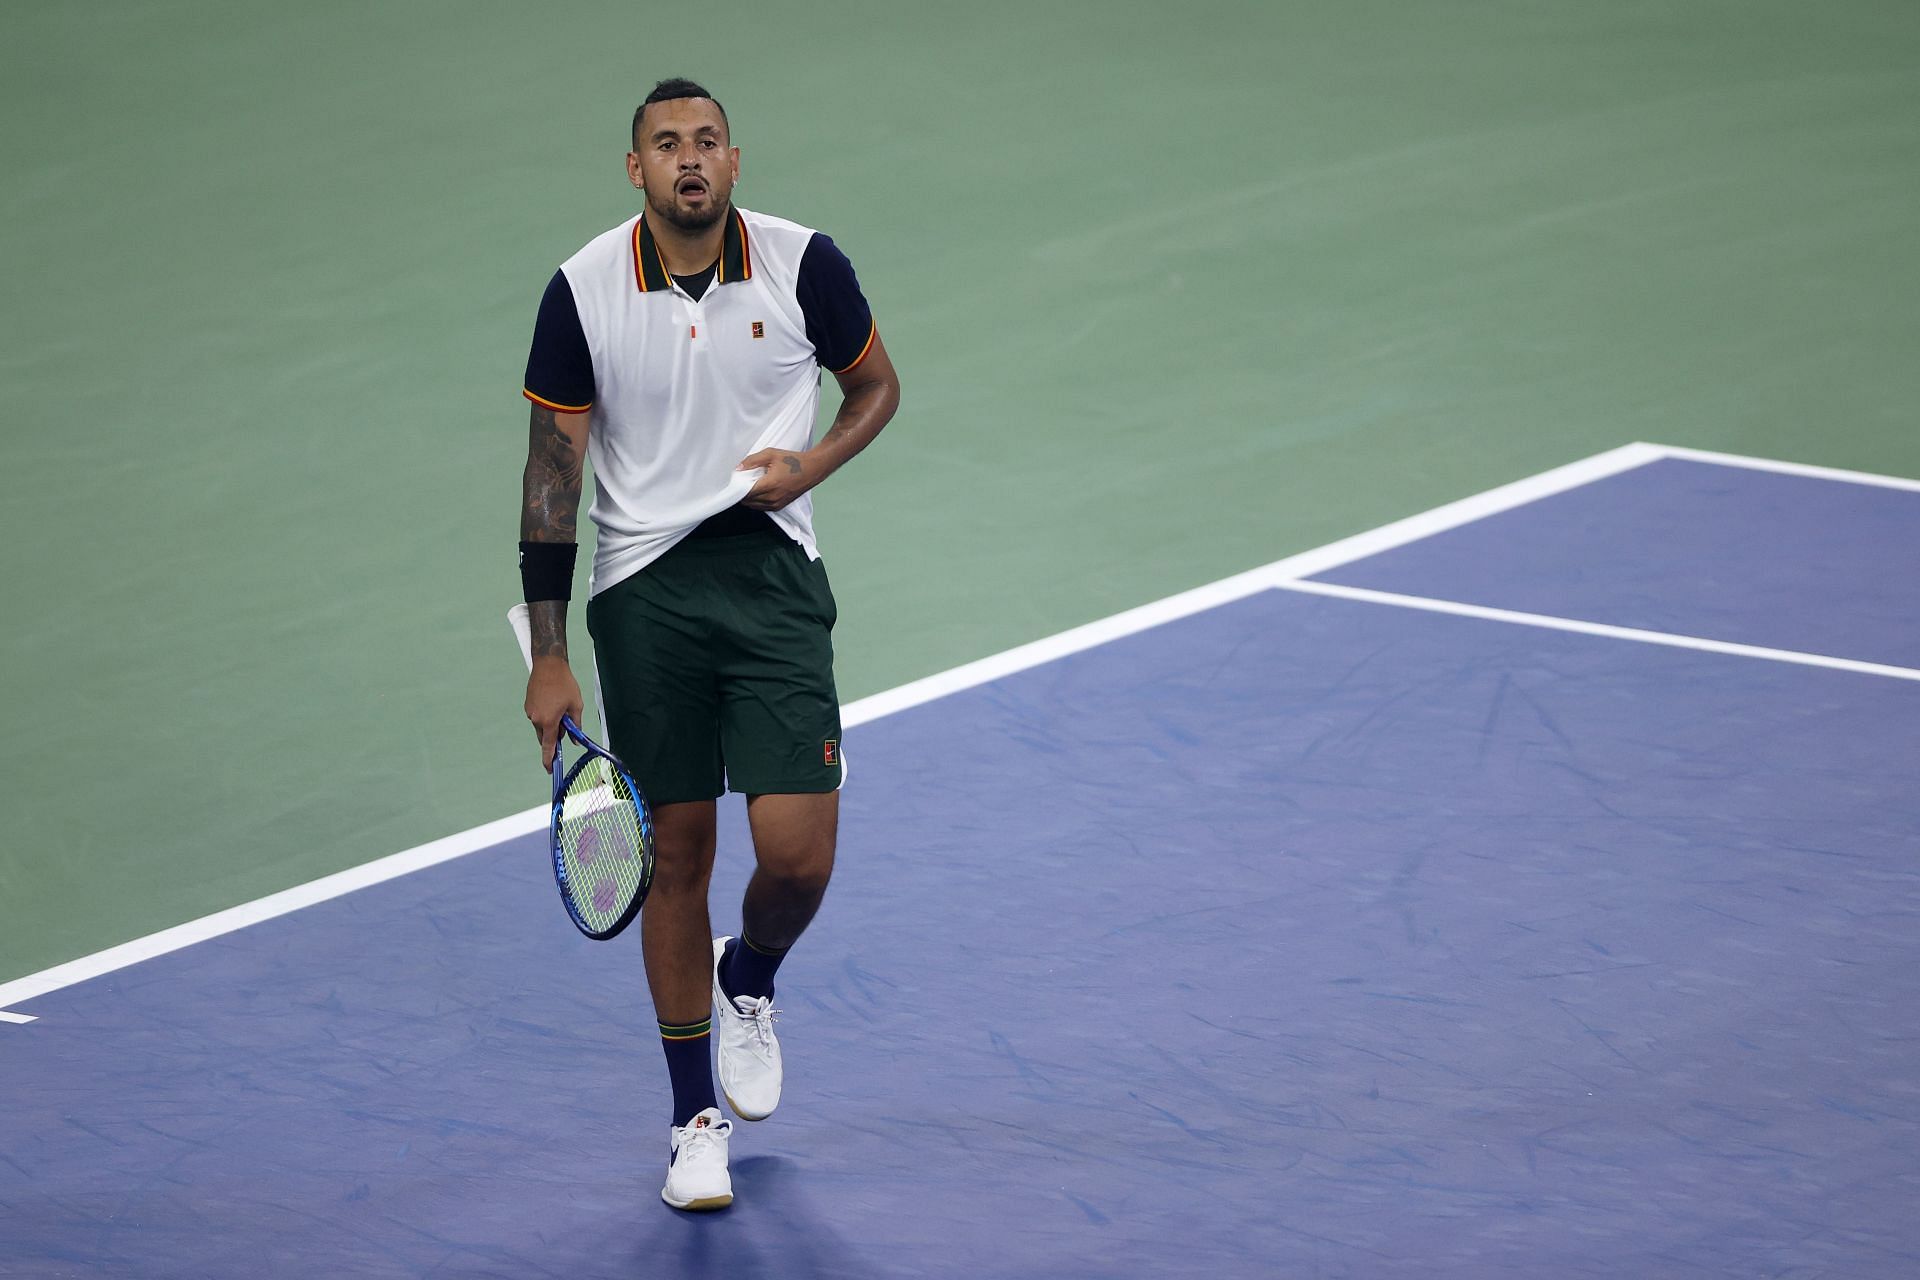 Nick Kyrgios is all set to play at the US Open this year.